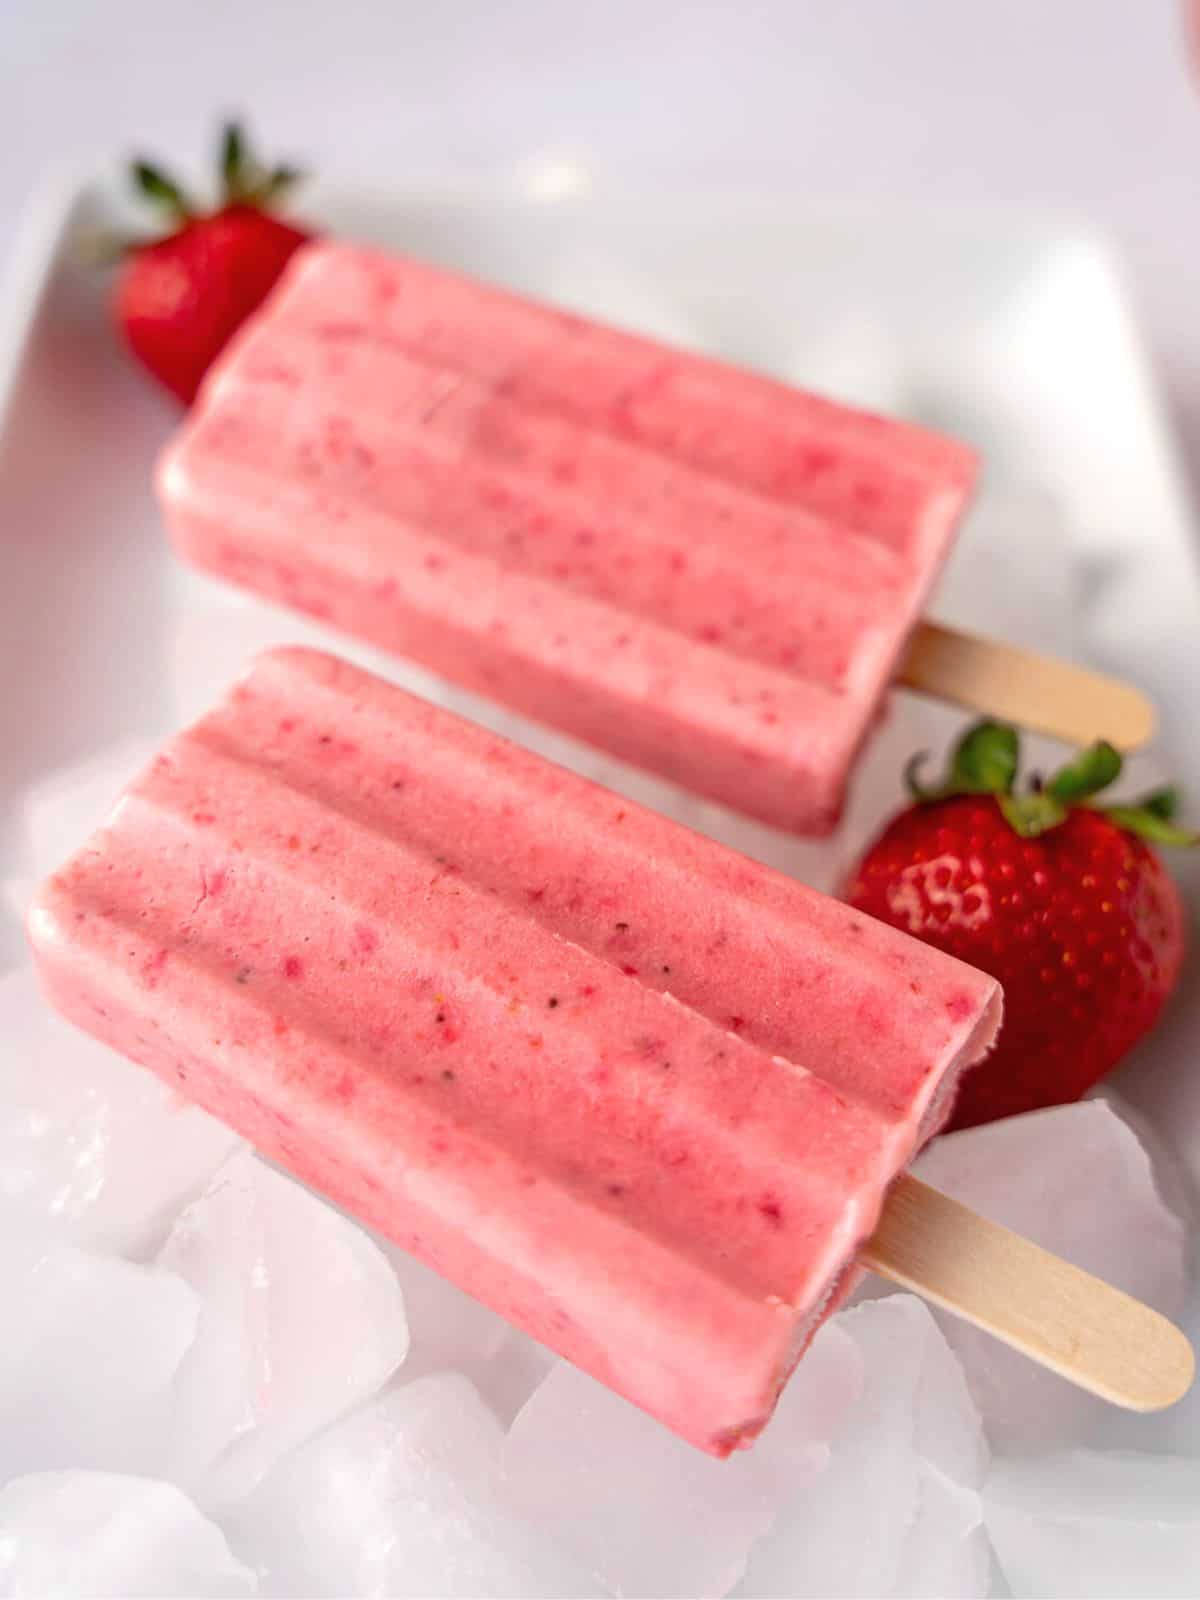 Two strawberry popsicles on ice.